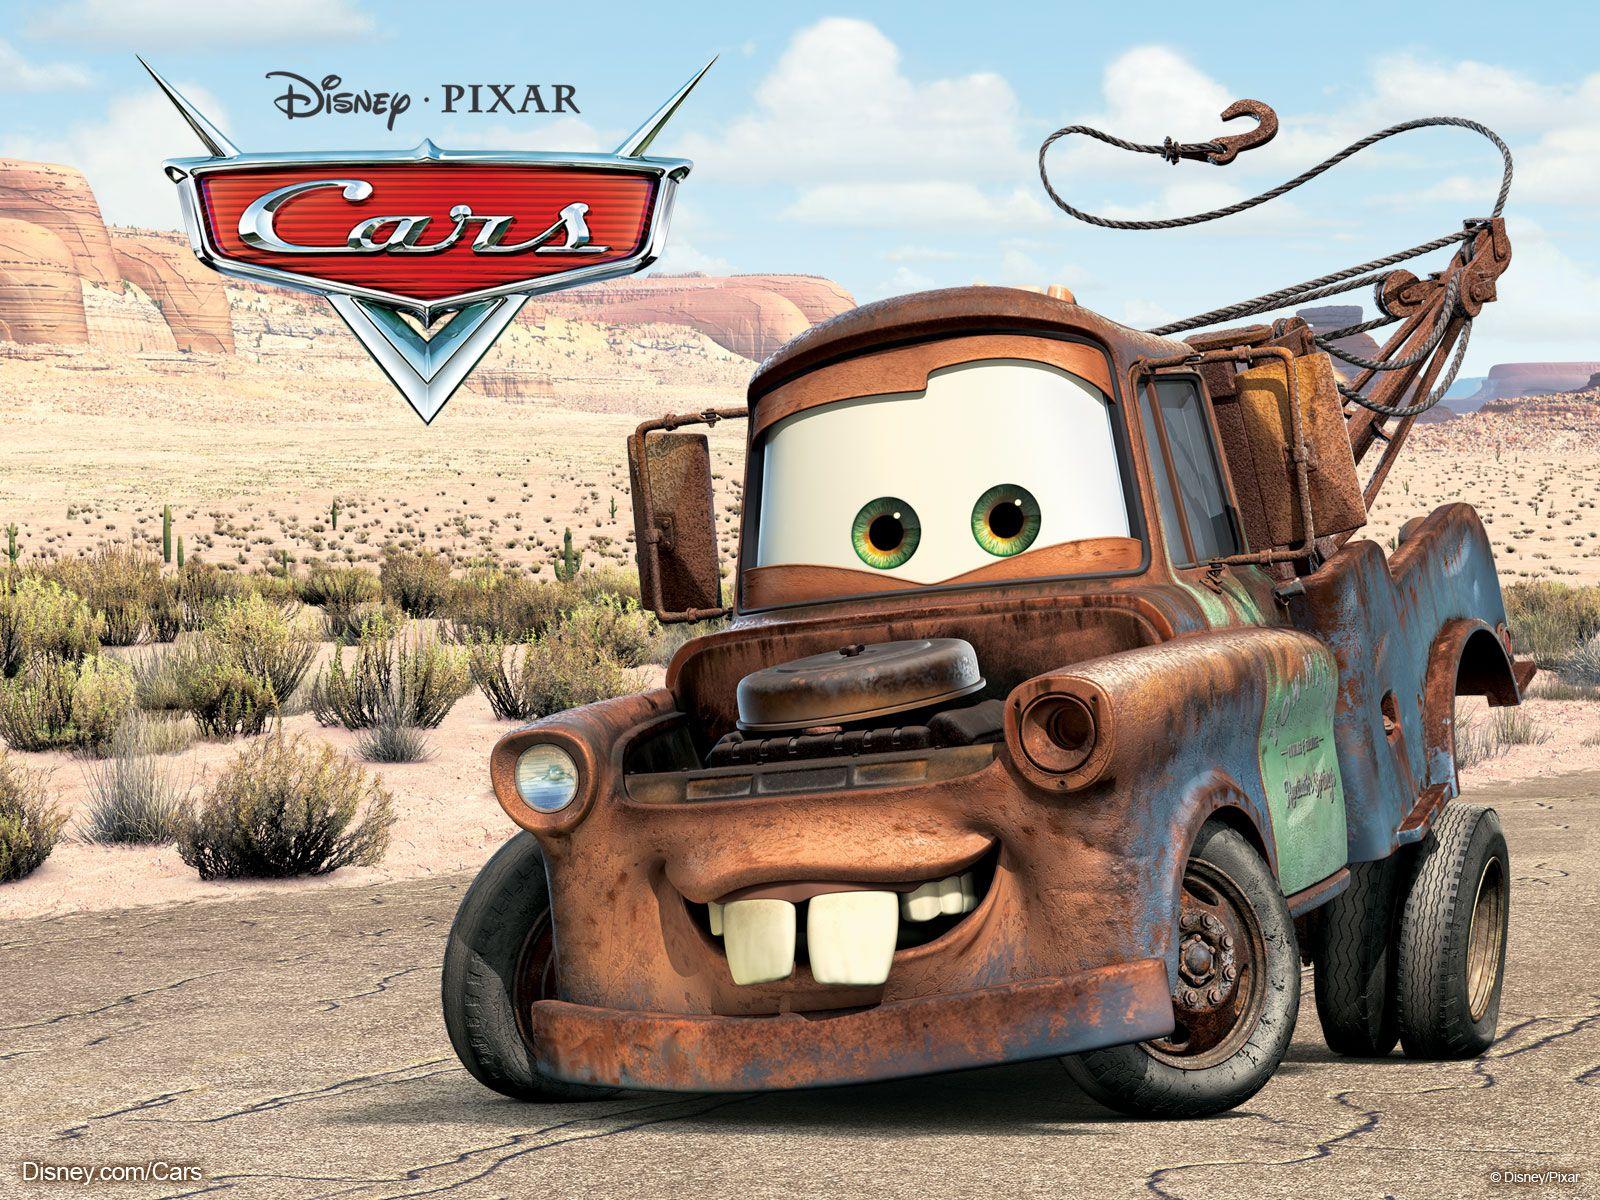 Mater the Tow Truck from Pixar's Cars Movie Desktop Wallpapers.